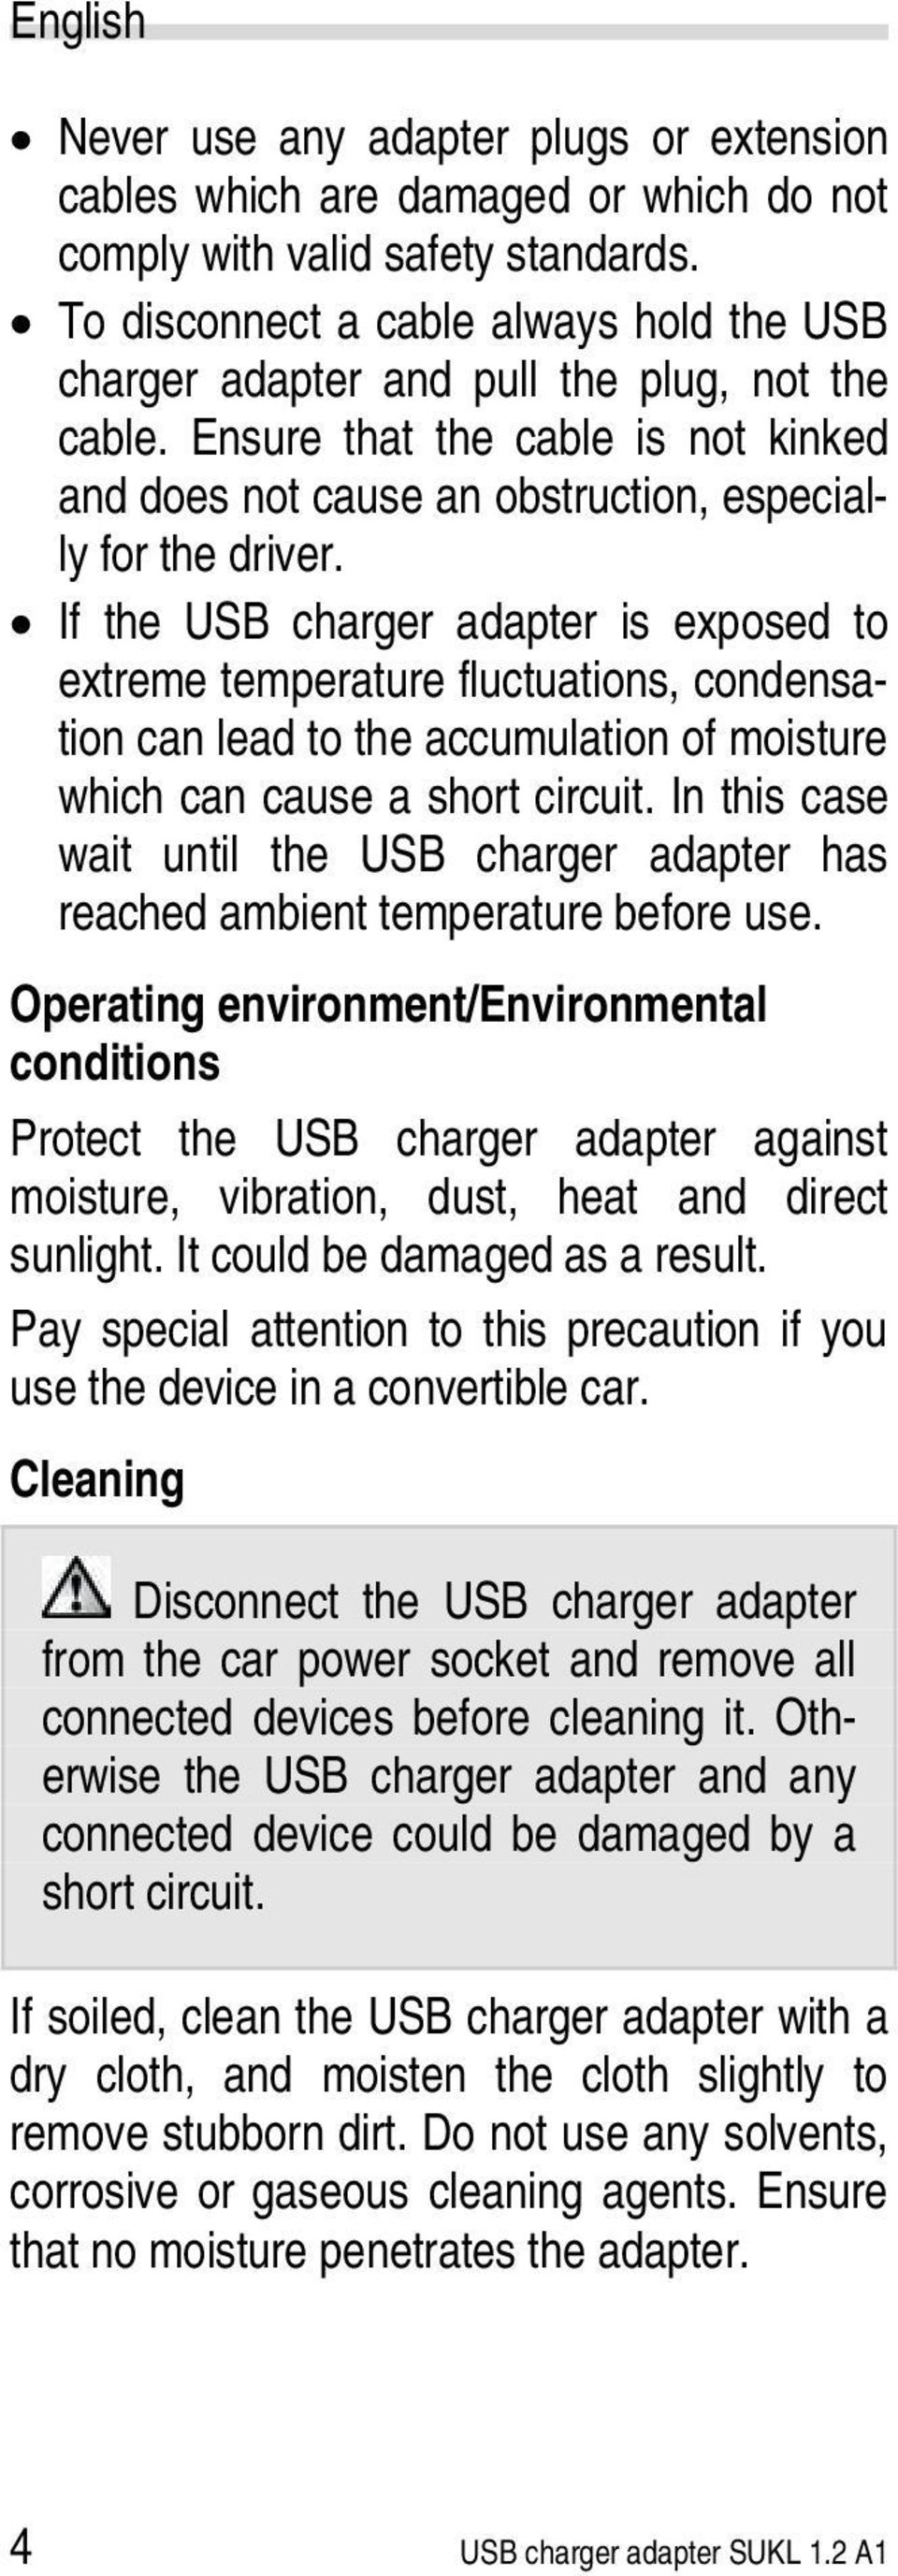 If the USB charger adapter is exposed to extreme temperature fluctuations, condensation can lead to the accumulation of moisture which can cause a short circuit.